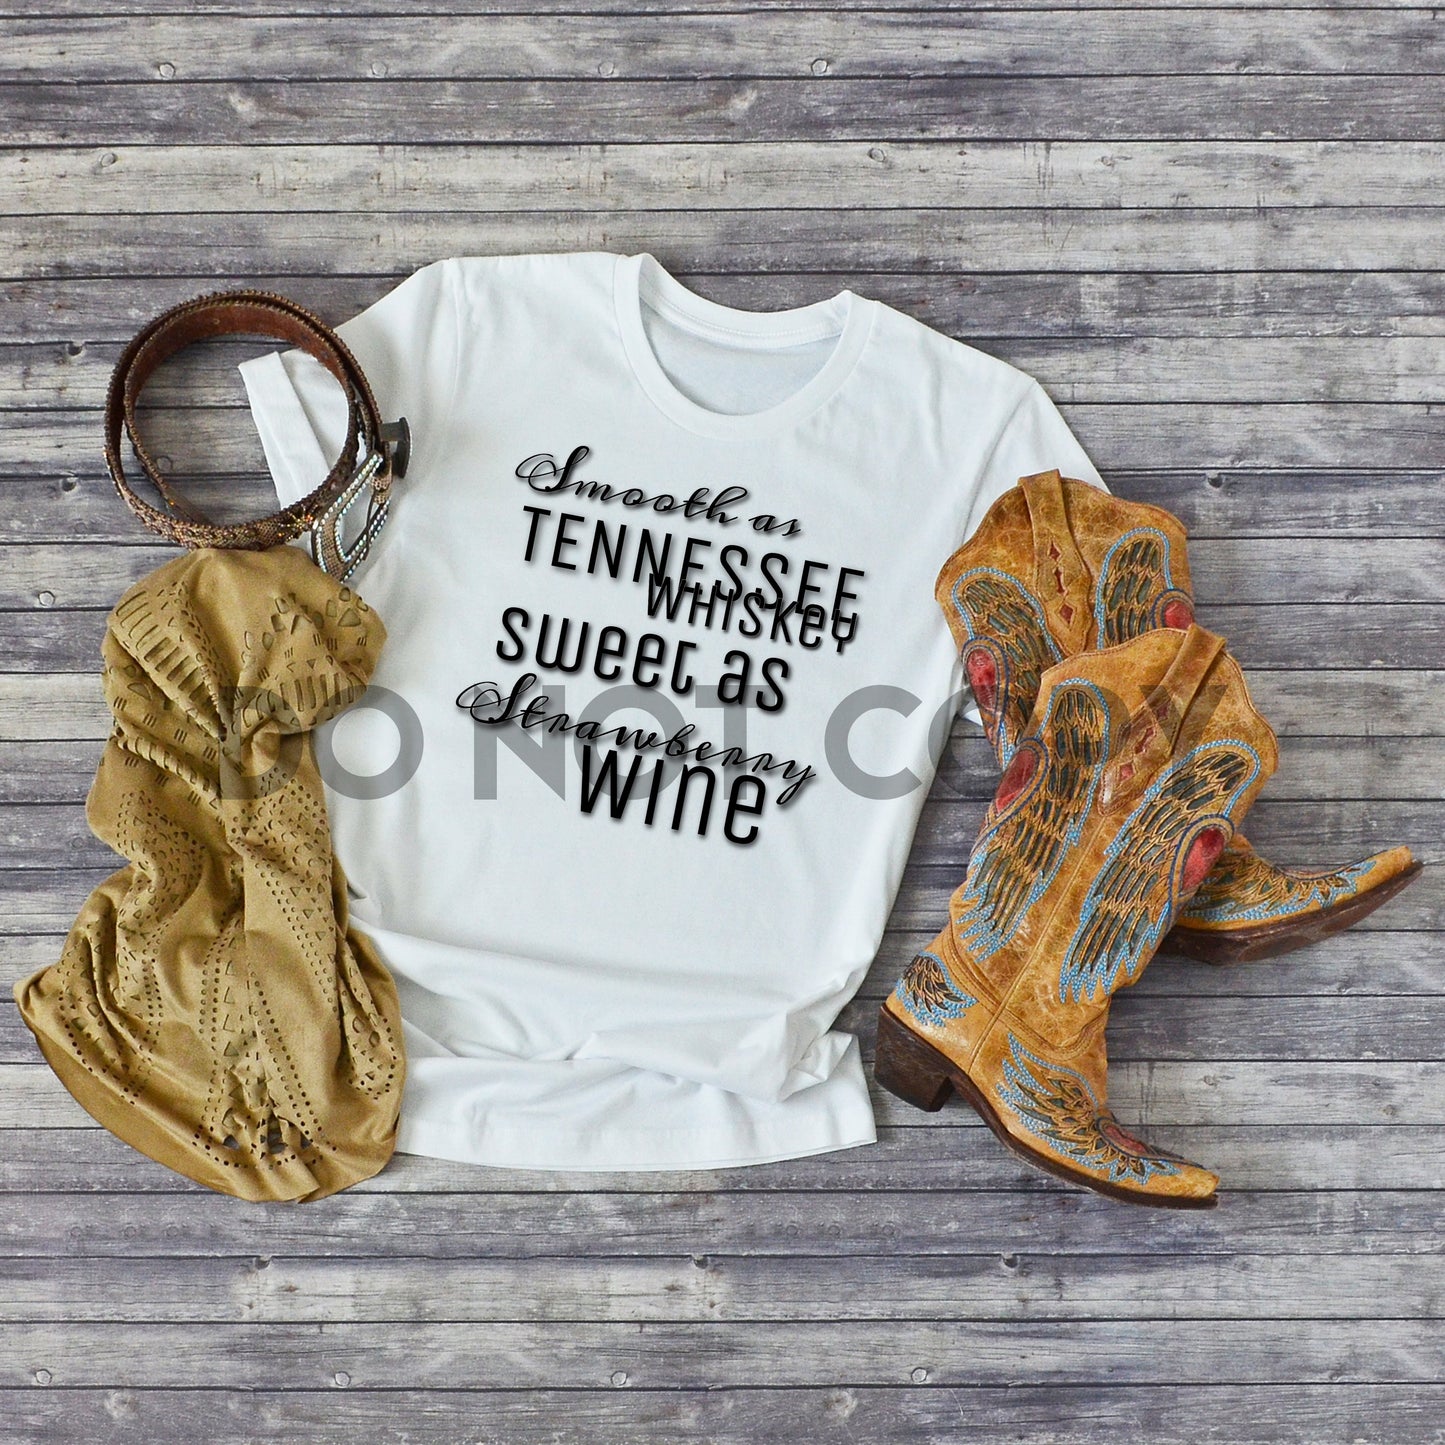 Smooth as Tennessee Whiskey Sublimation Print